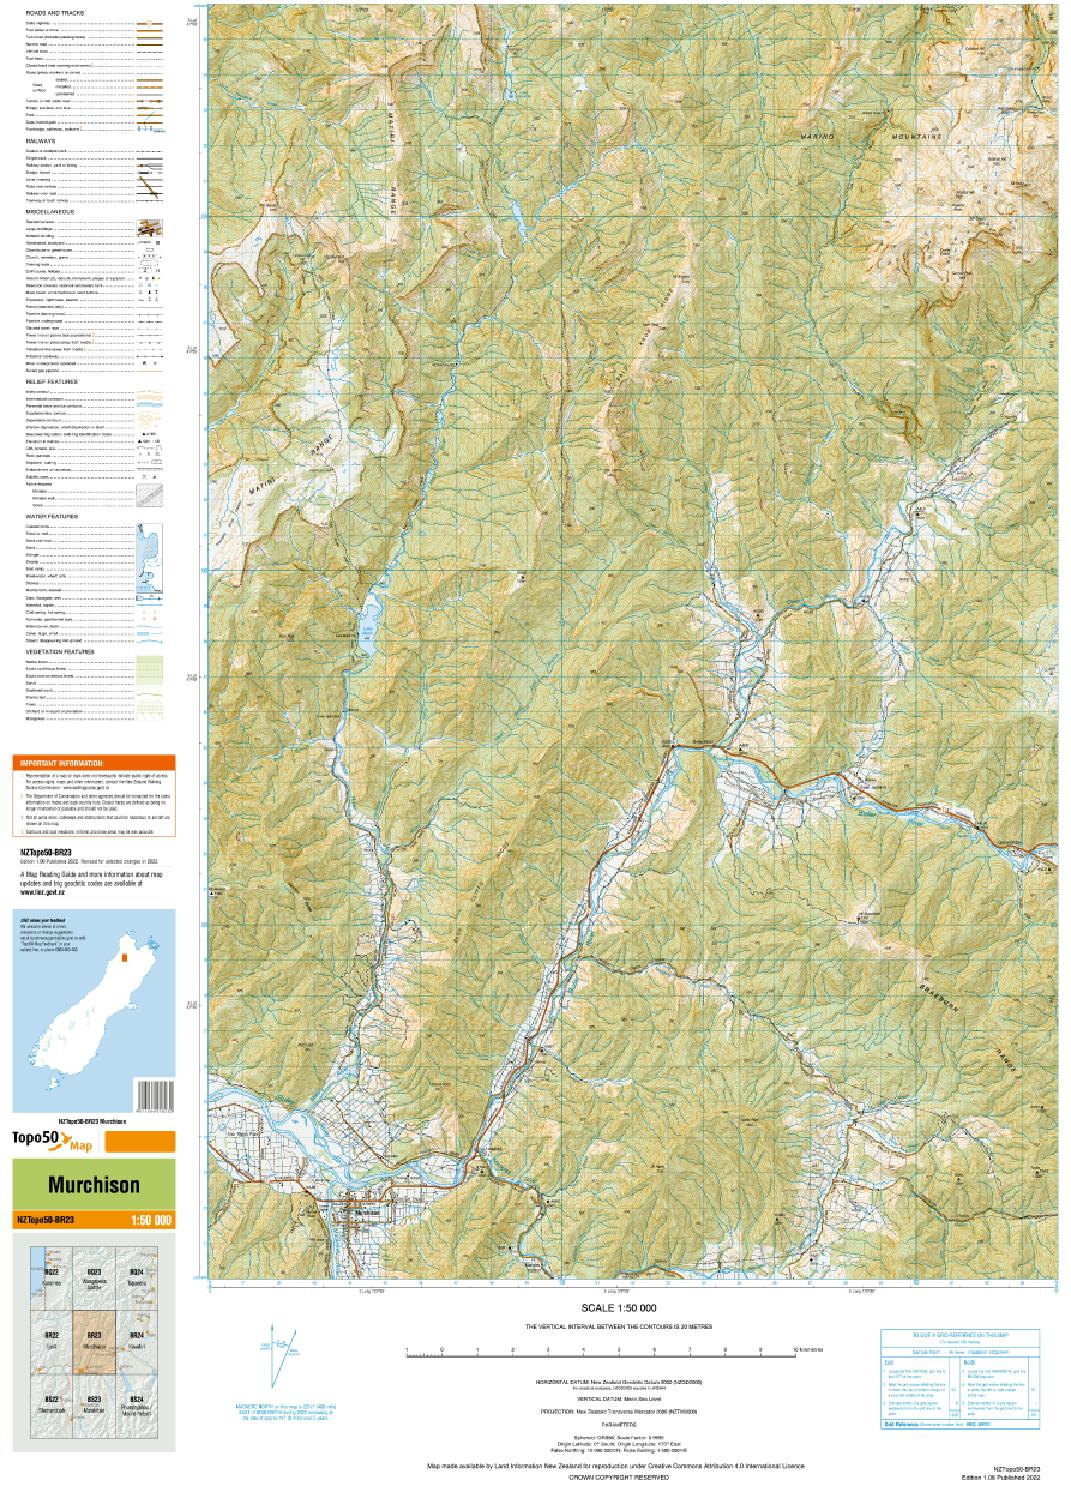 Topo map of Murchison